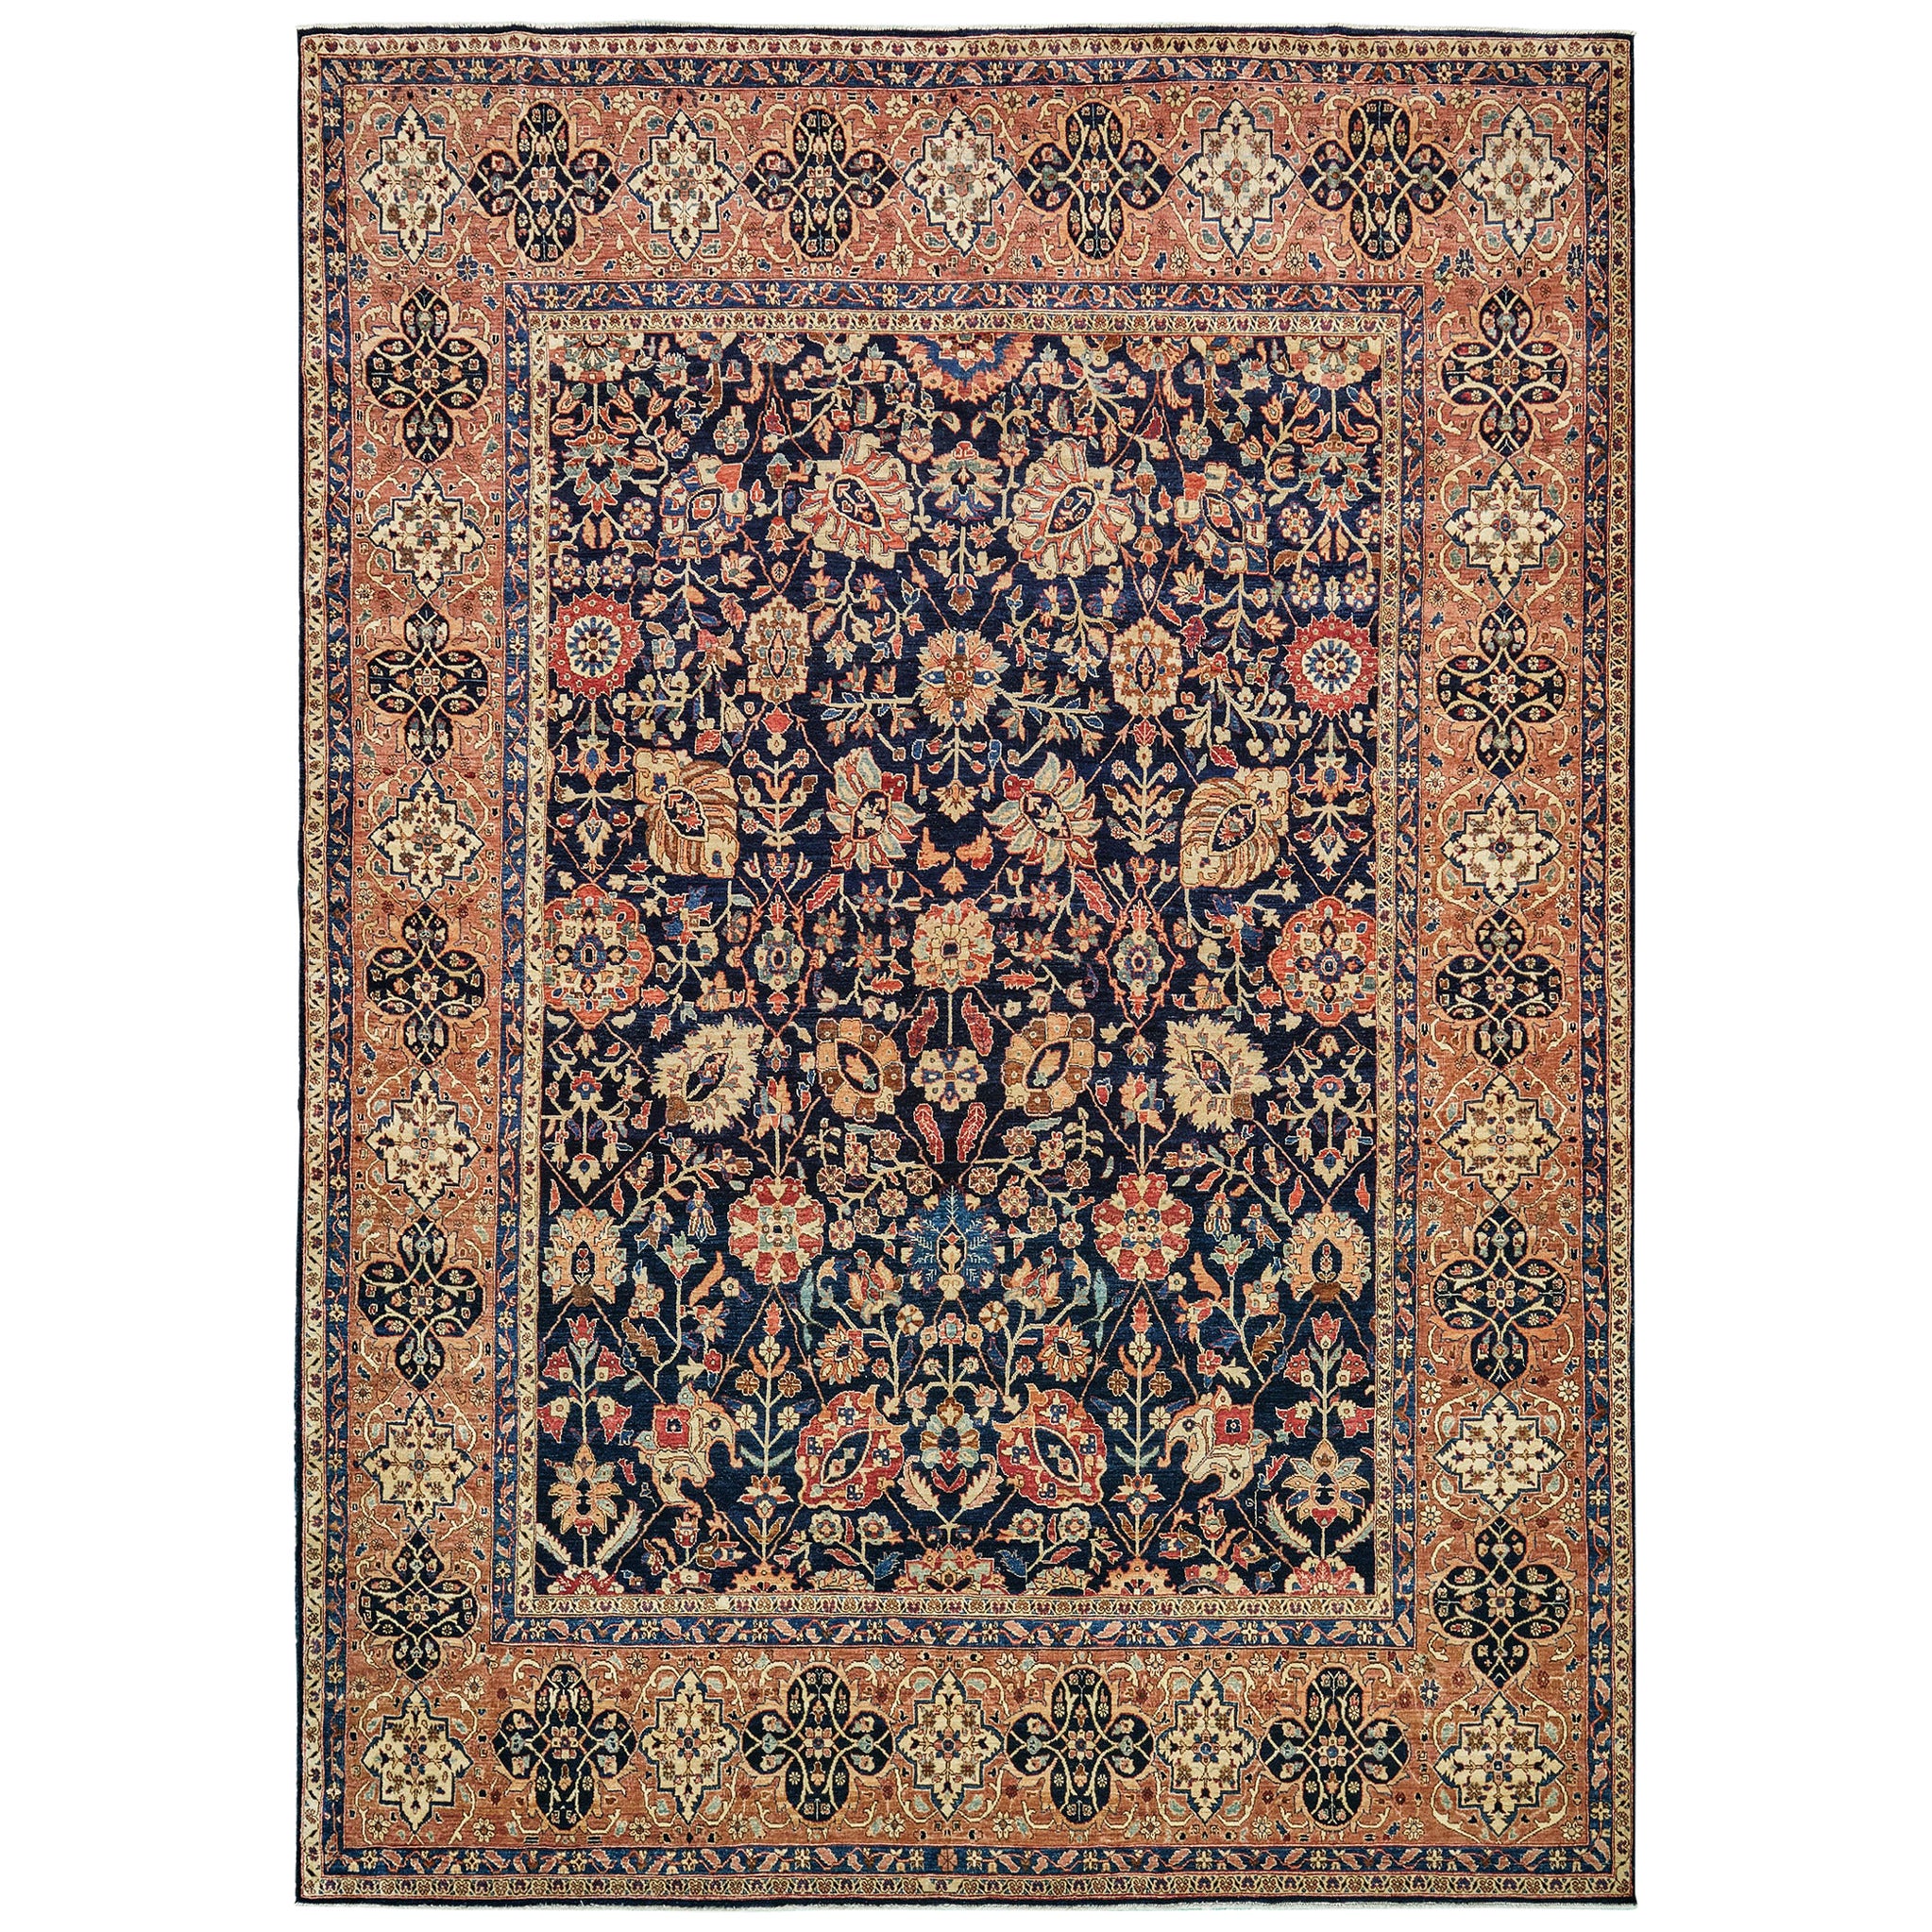 Antique Hajijalili Revival Rug Fable Collection